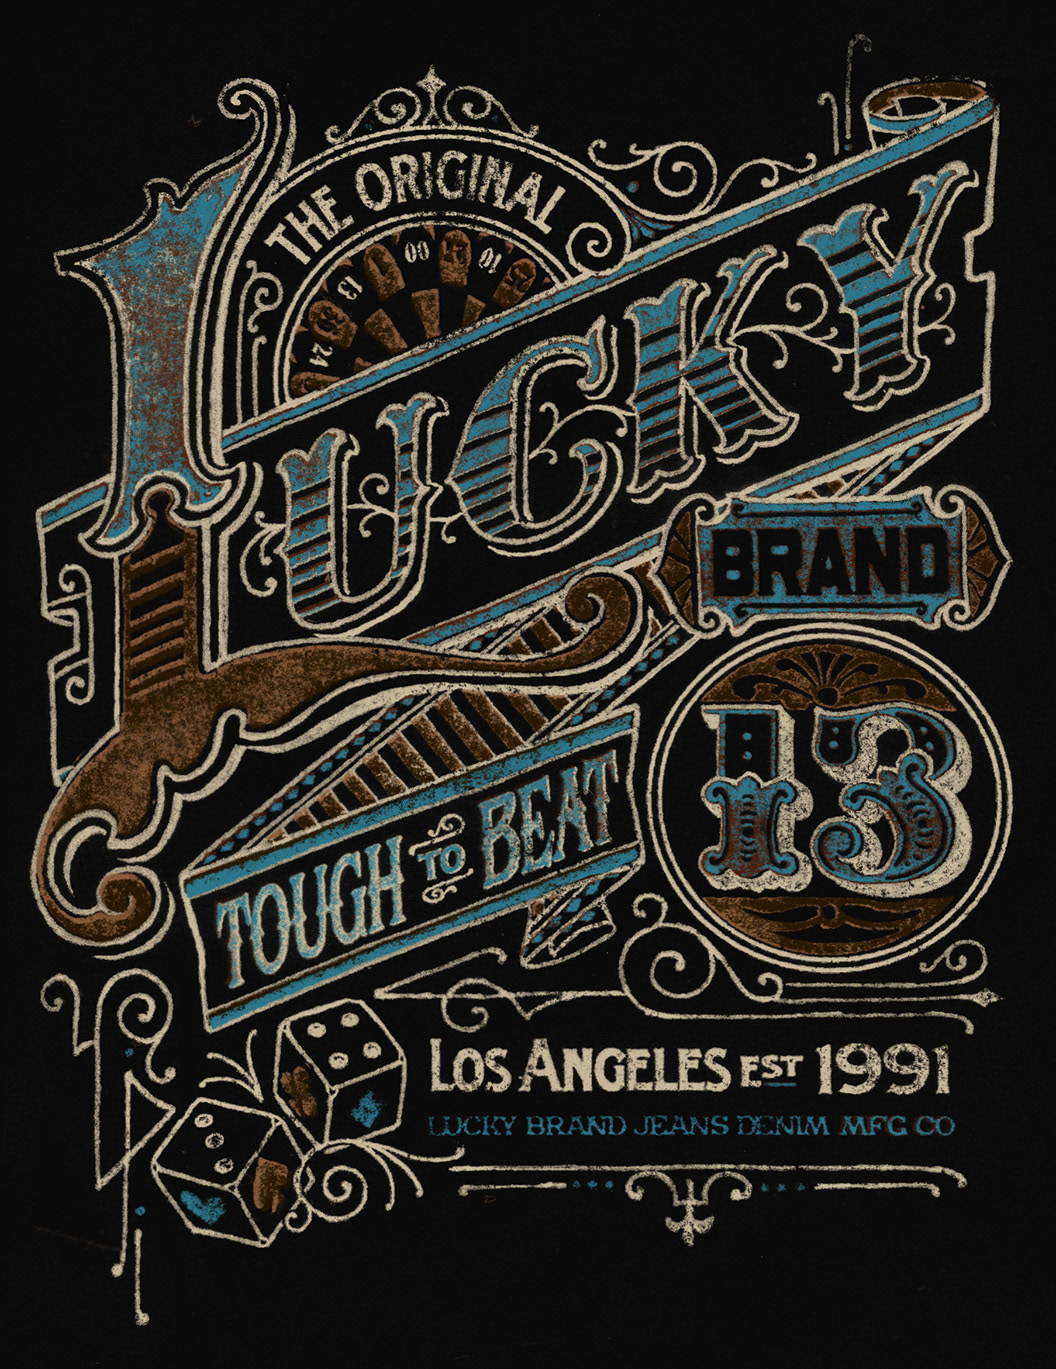 Michael Hinkle Graphic Design and Illustration - Lucky Brand T-shirt Designs